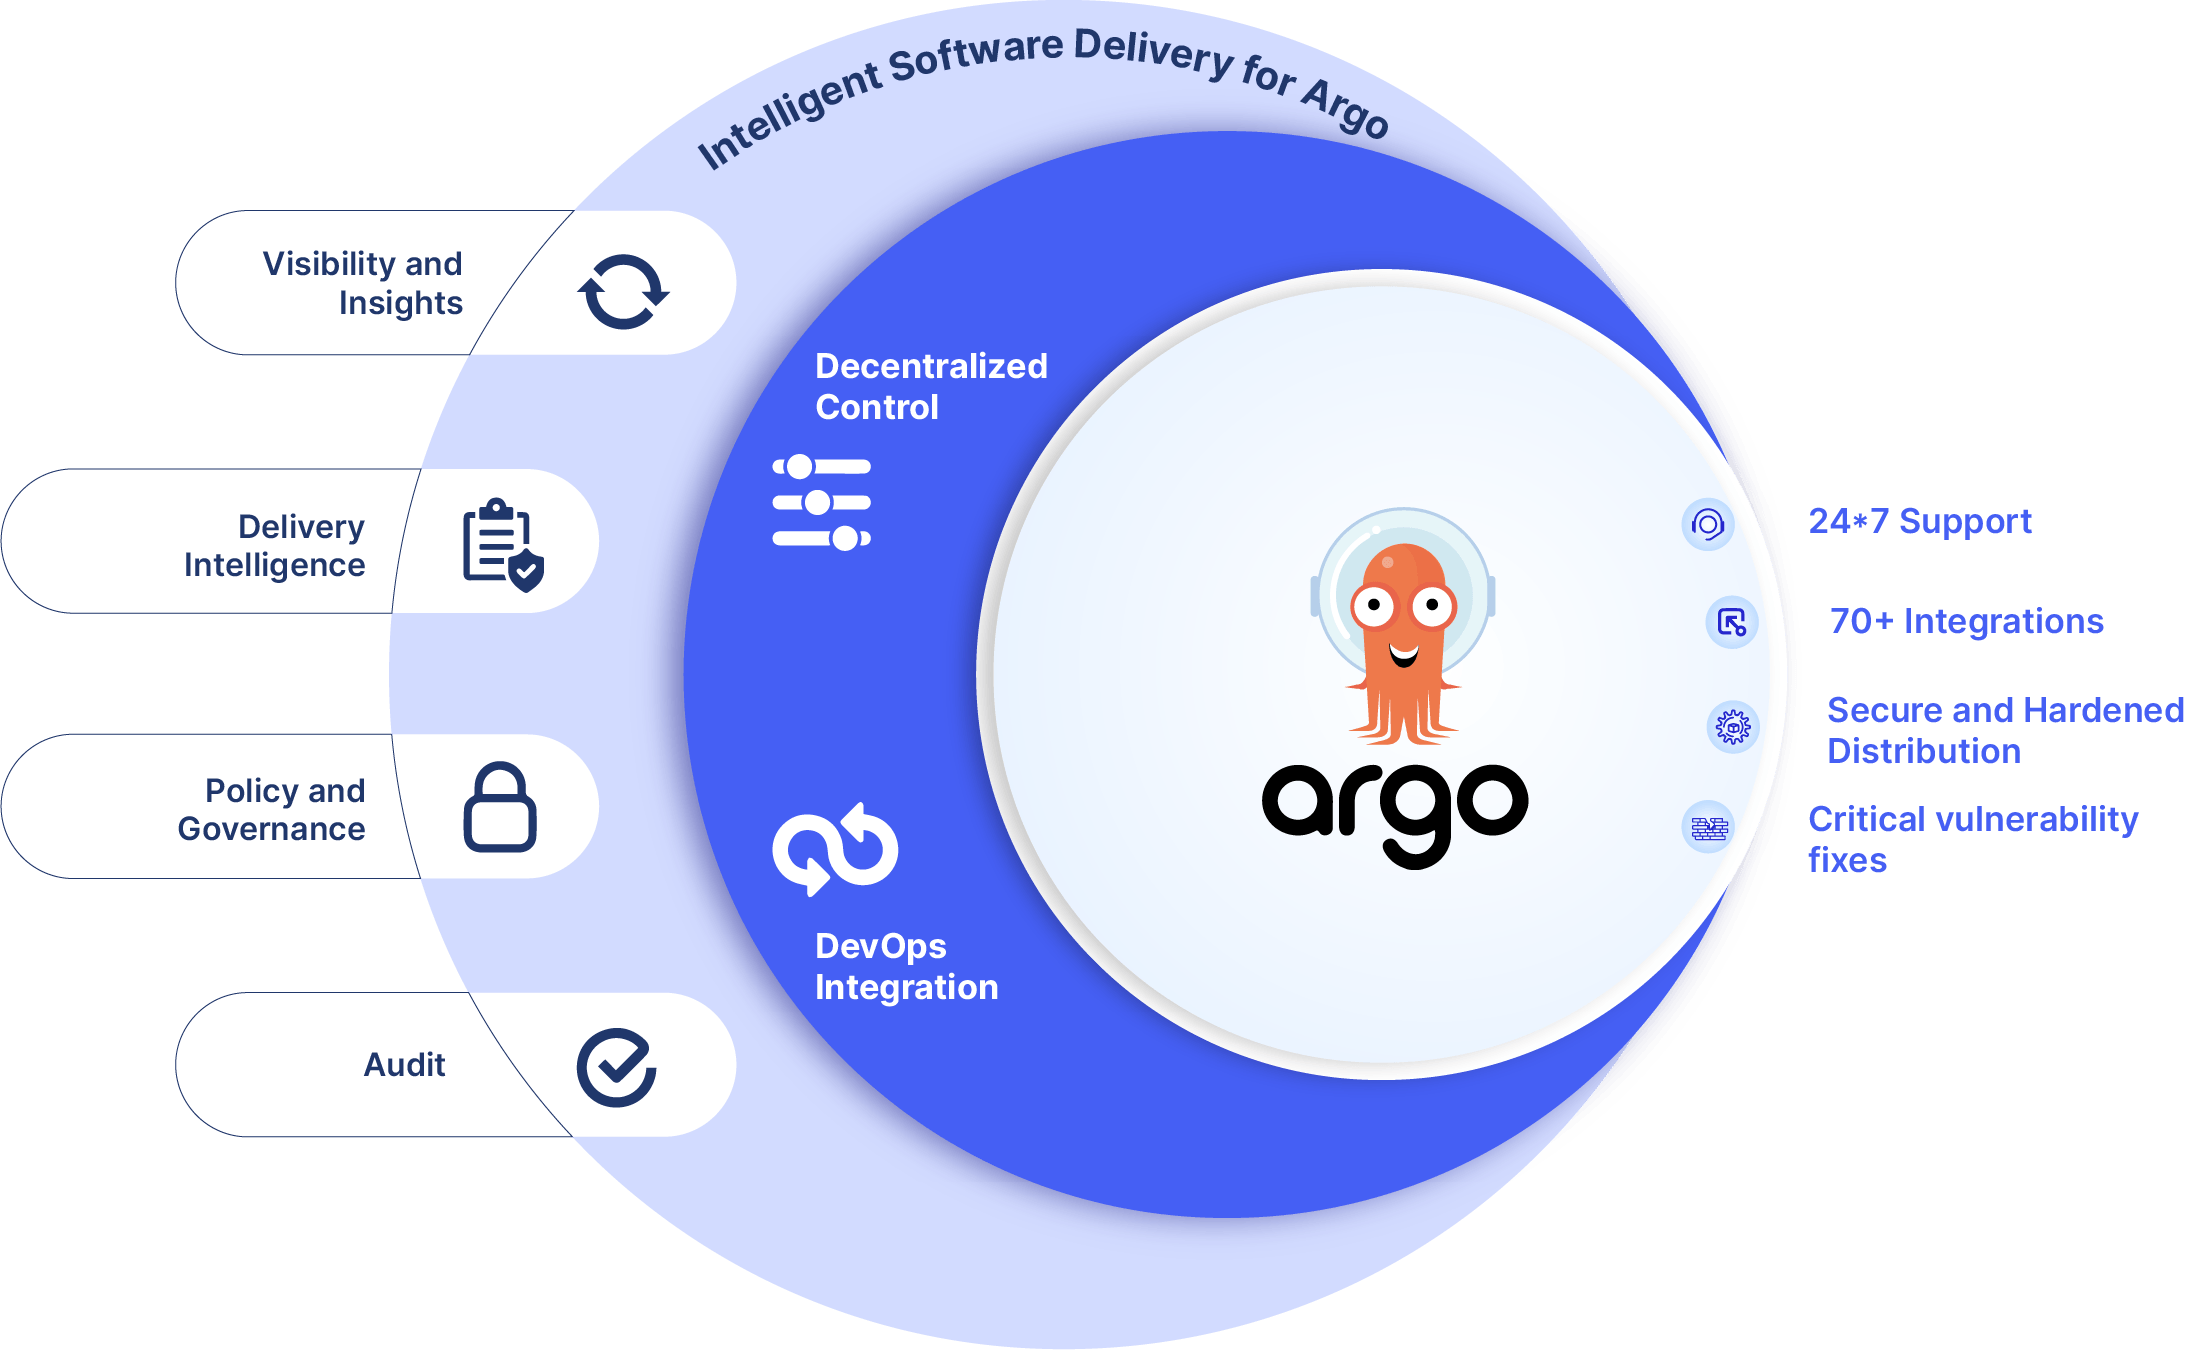 OpsMx Intelligent Software Delivery for Argo